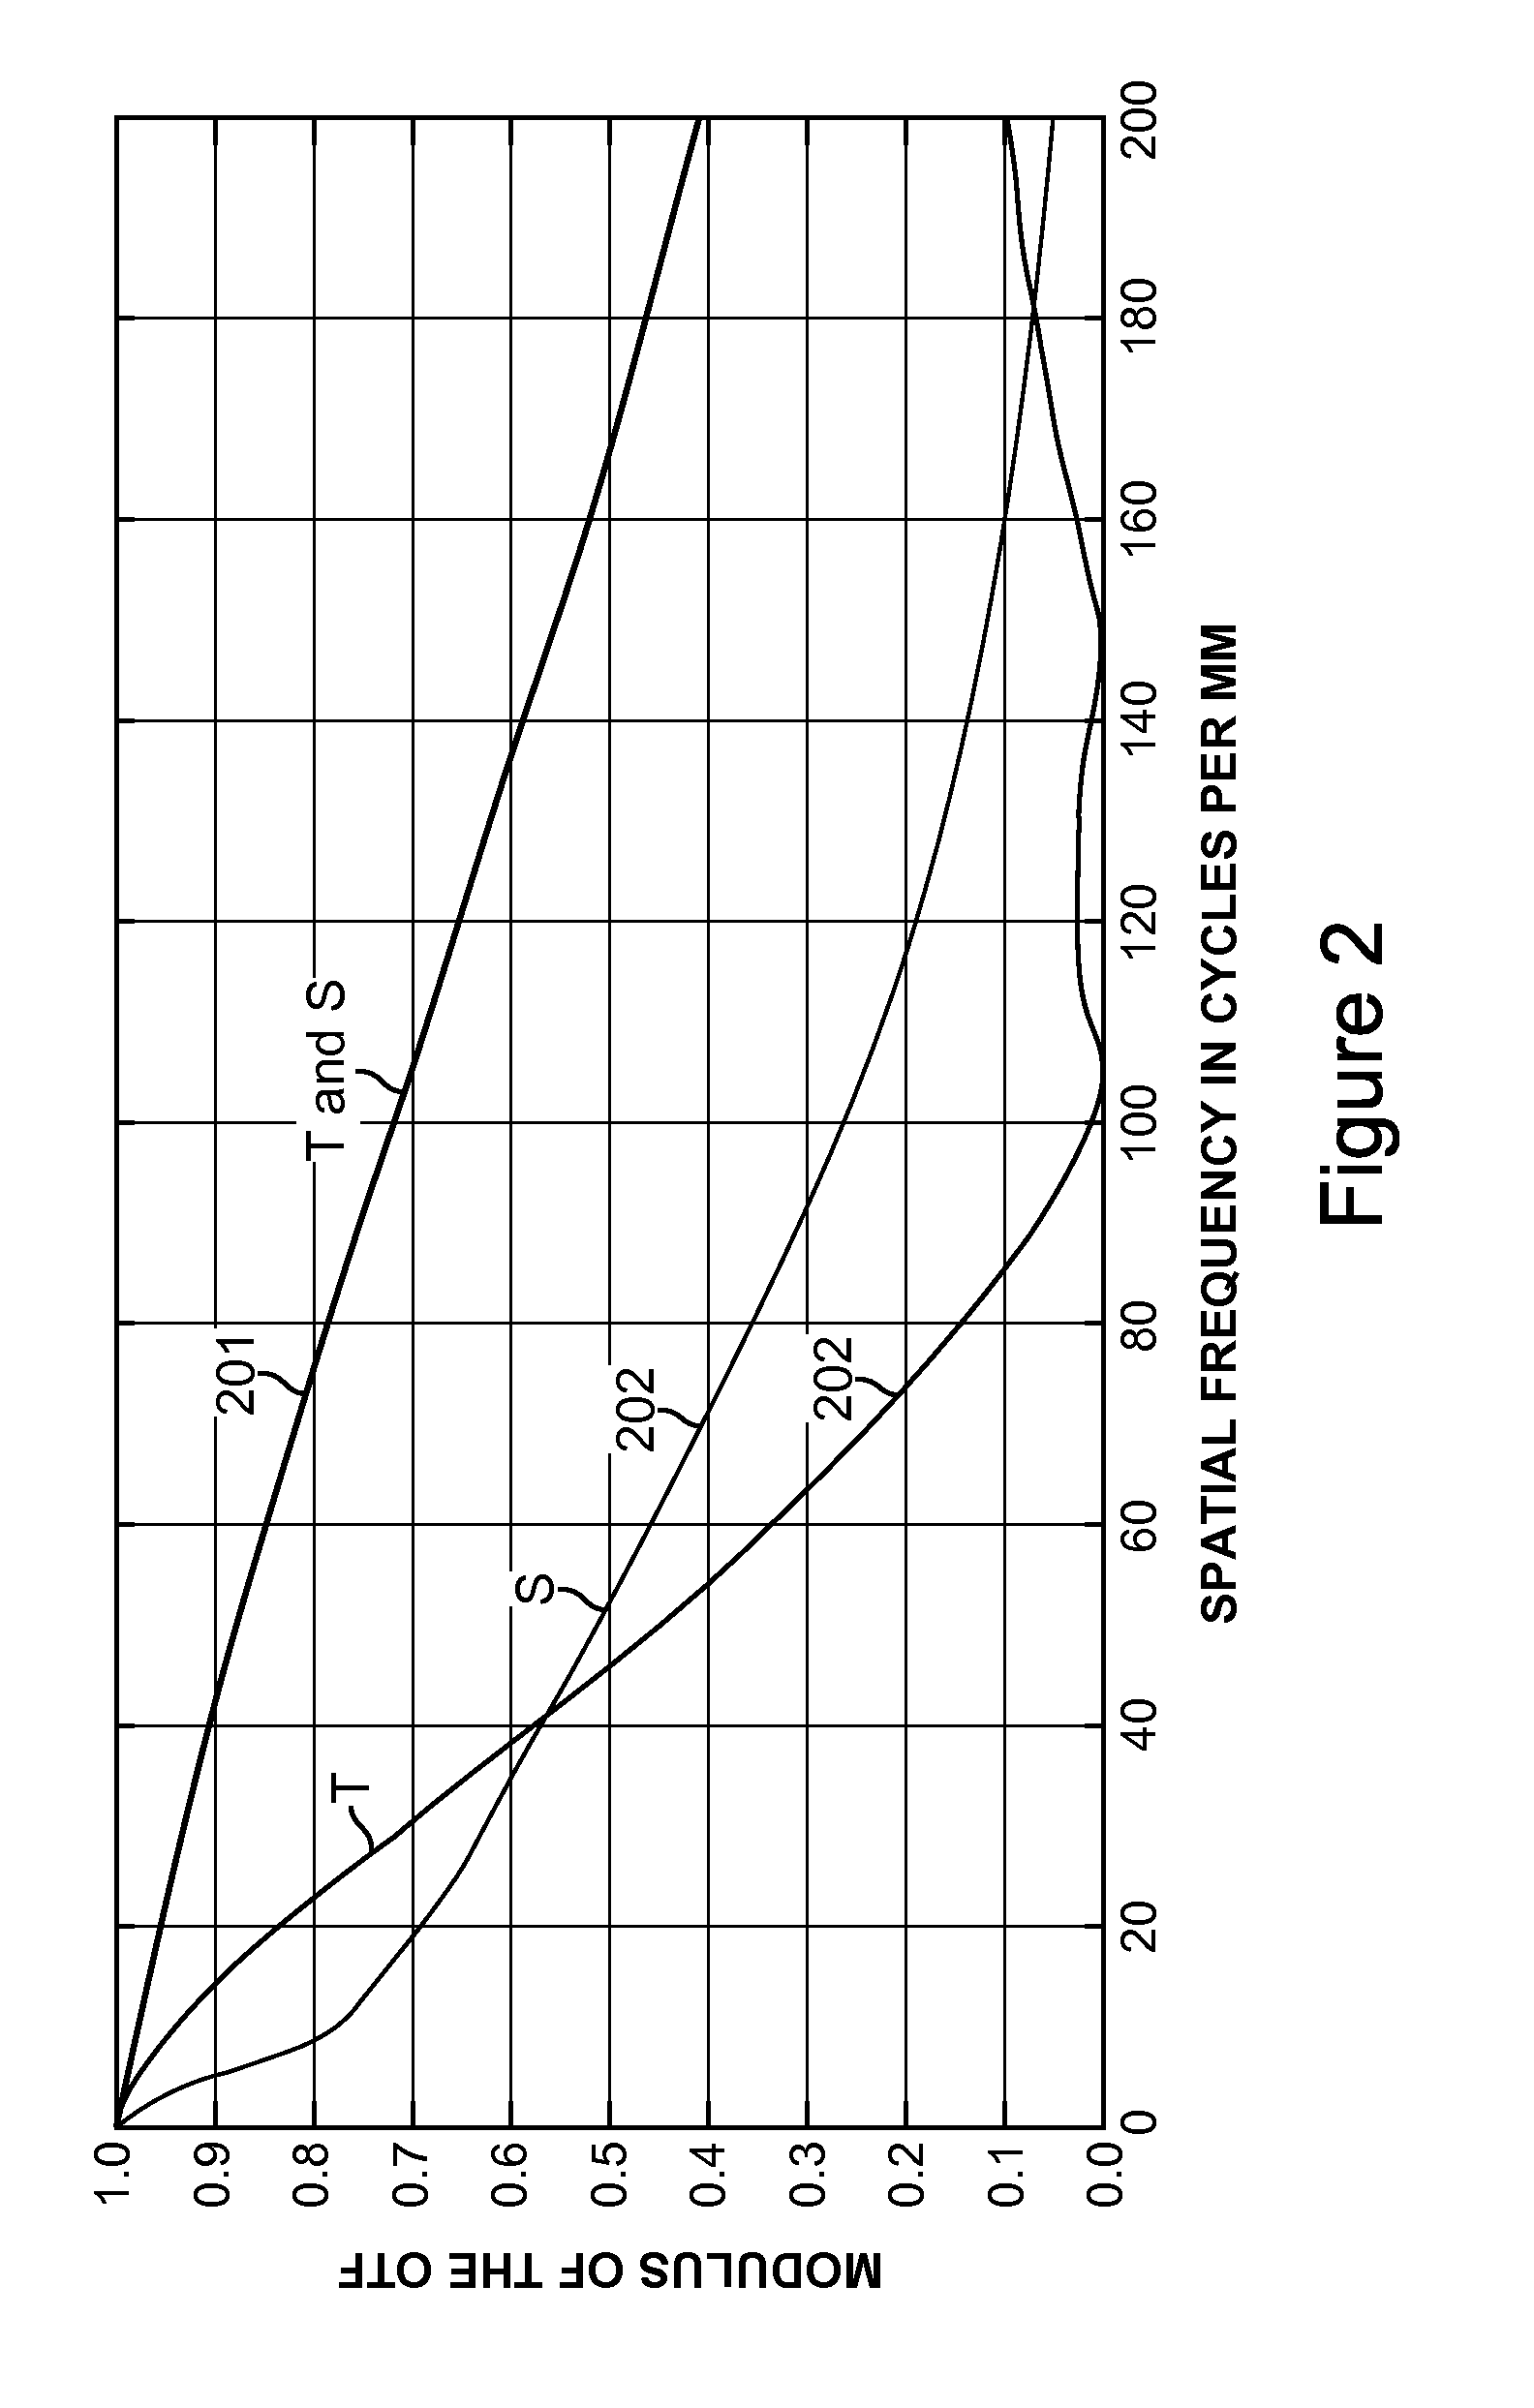 Large field of view, high numerical aperture compound objective lens with two pairs of identical elements and near IR spectrometer containing two such compound lenses